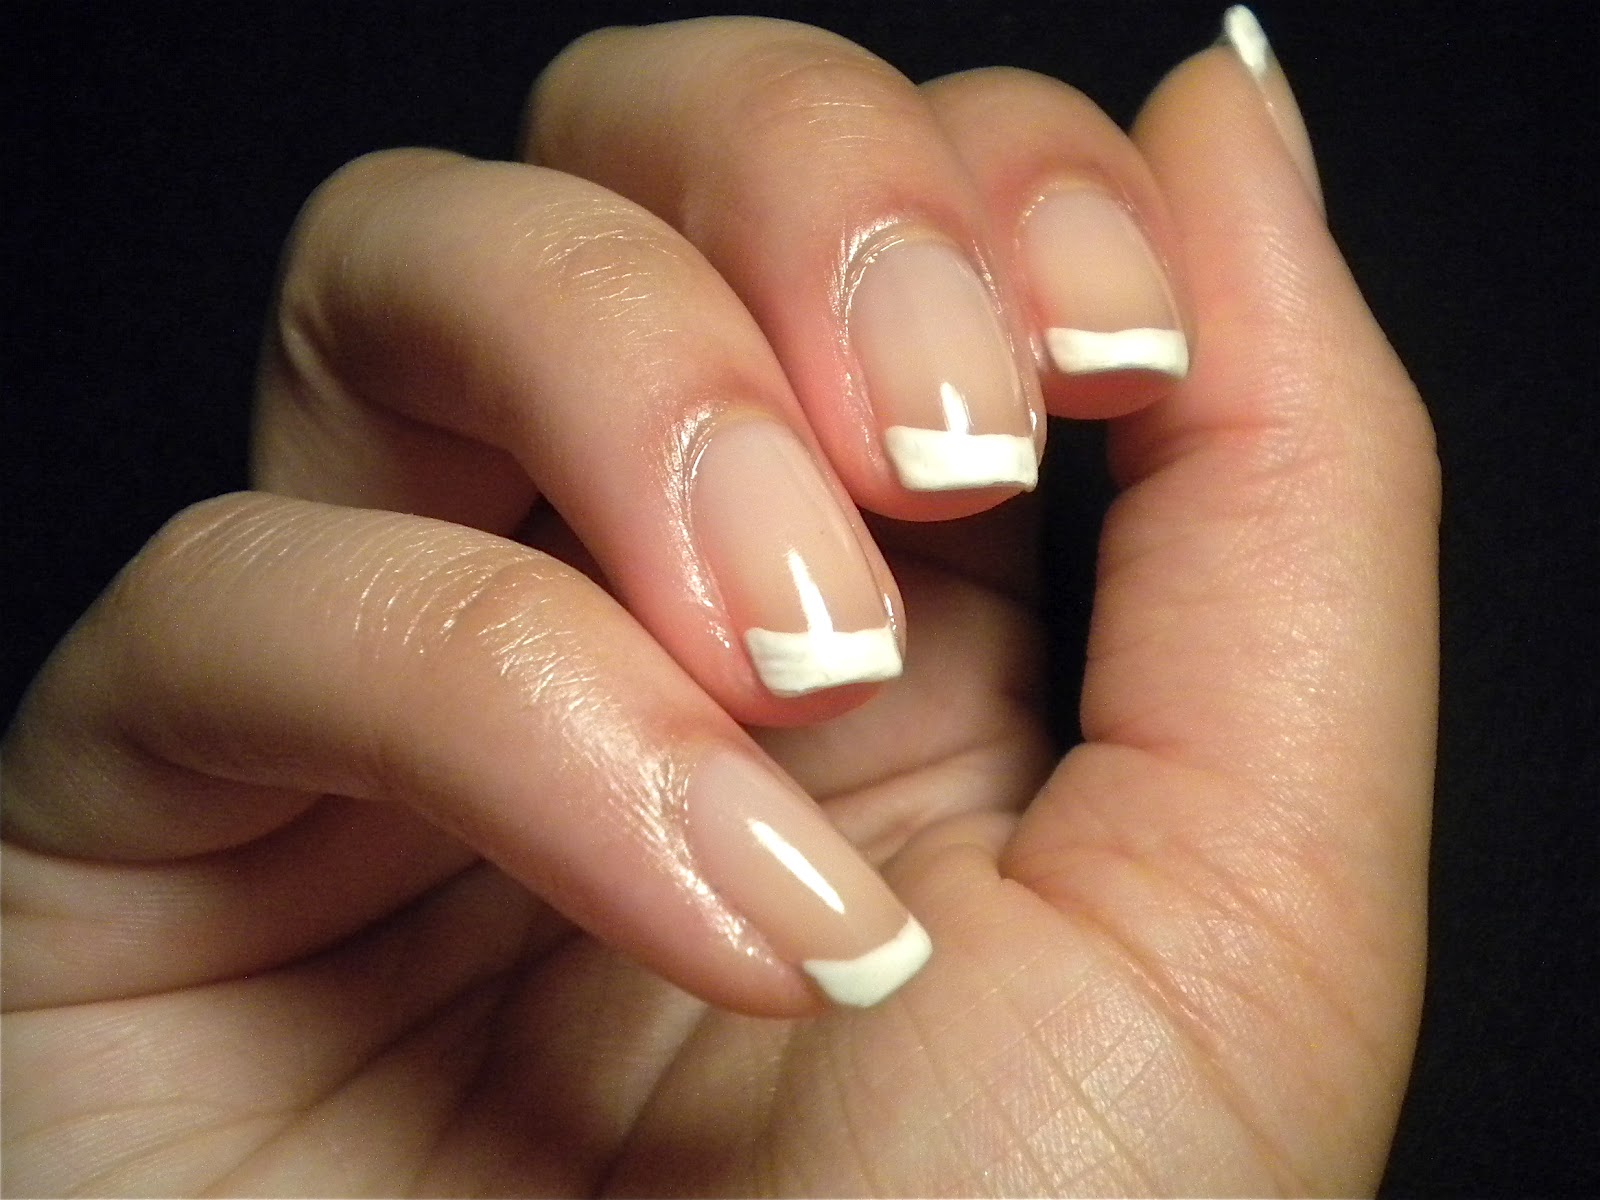 1. Pink and White French Manicure Nail Design - wide 1